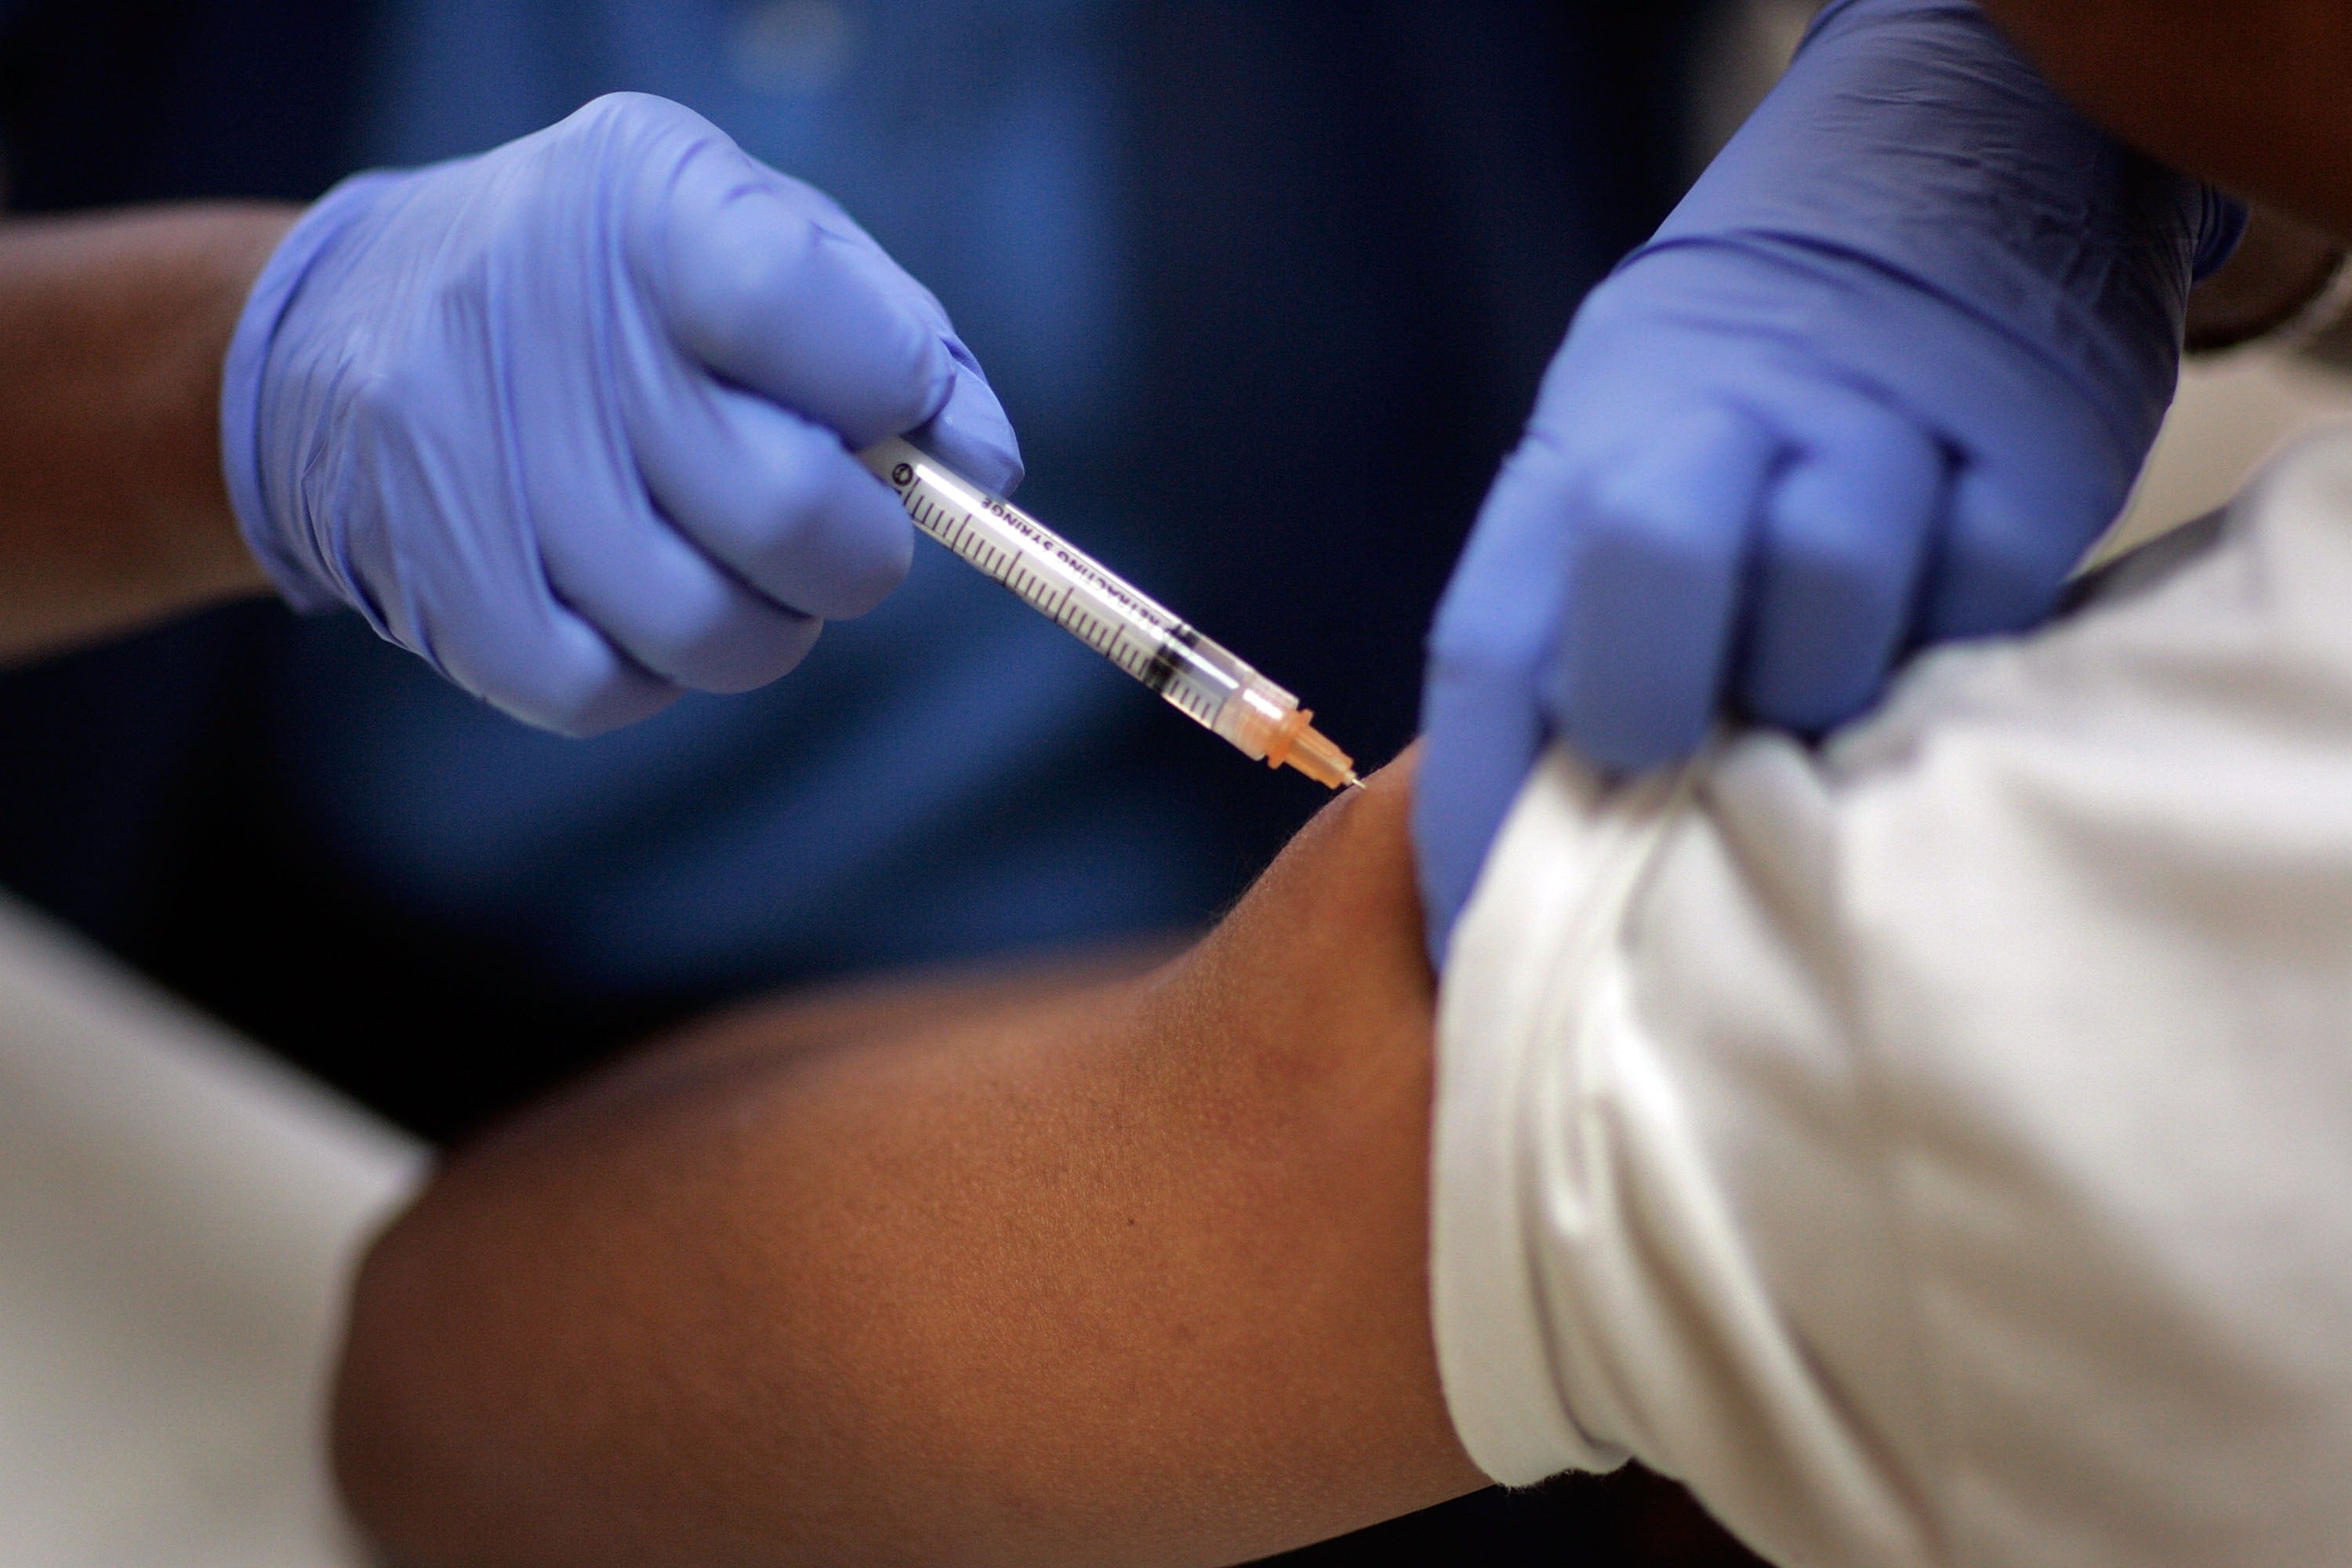 This winter, the flu vaccine is being offered for free to over 35 million people